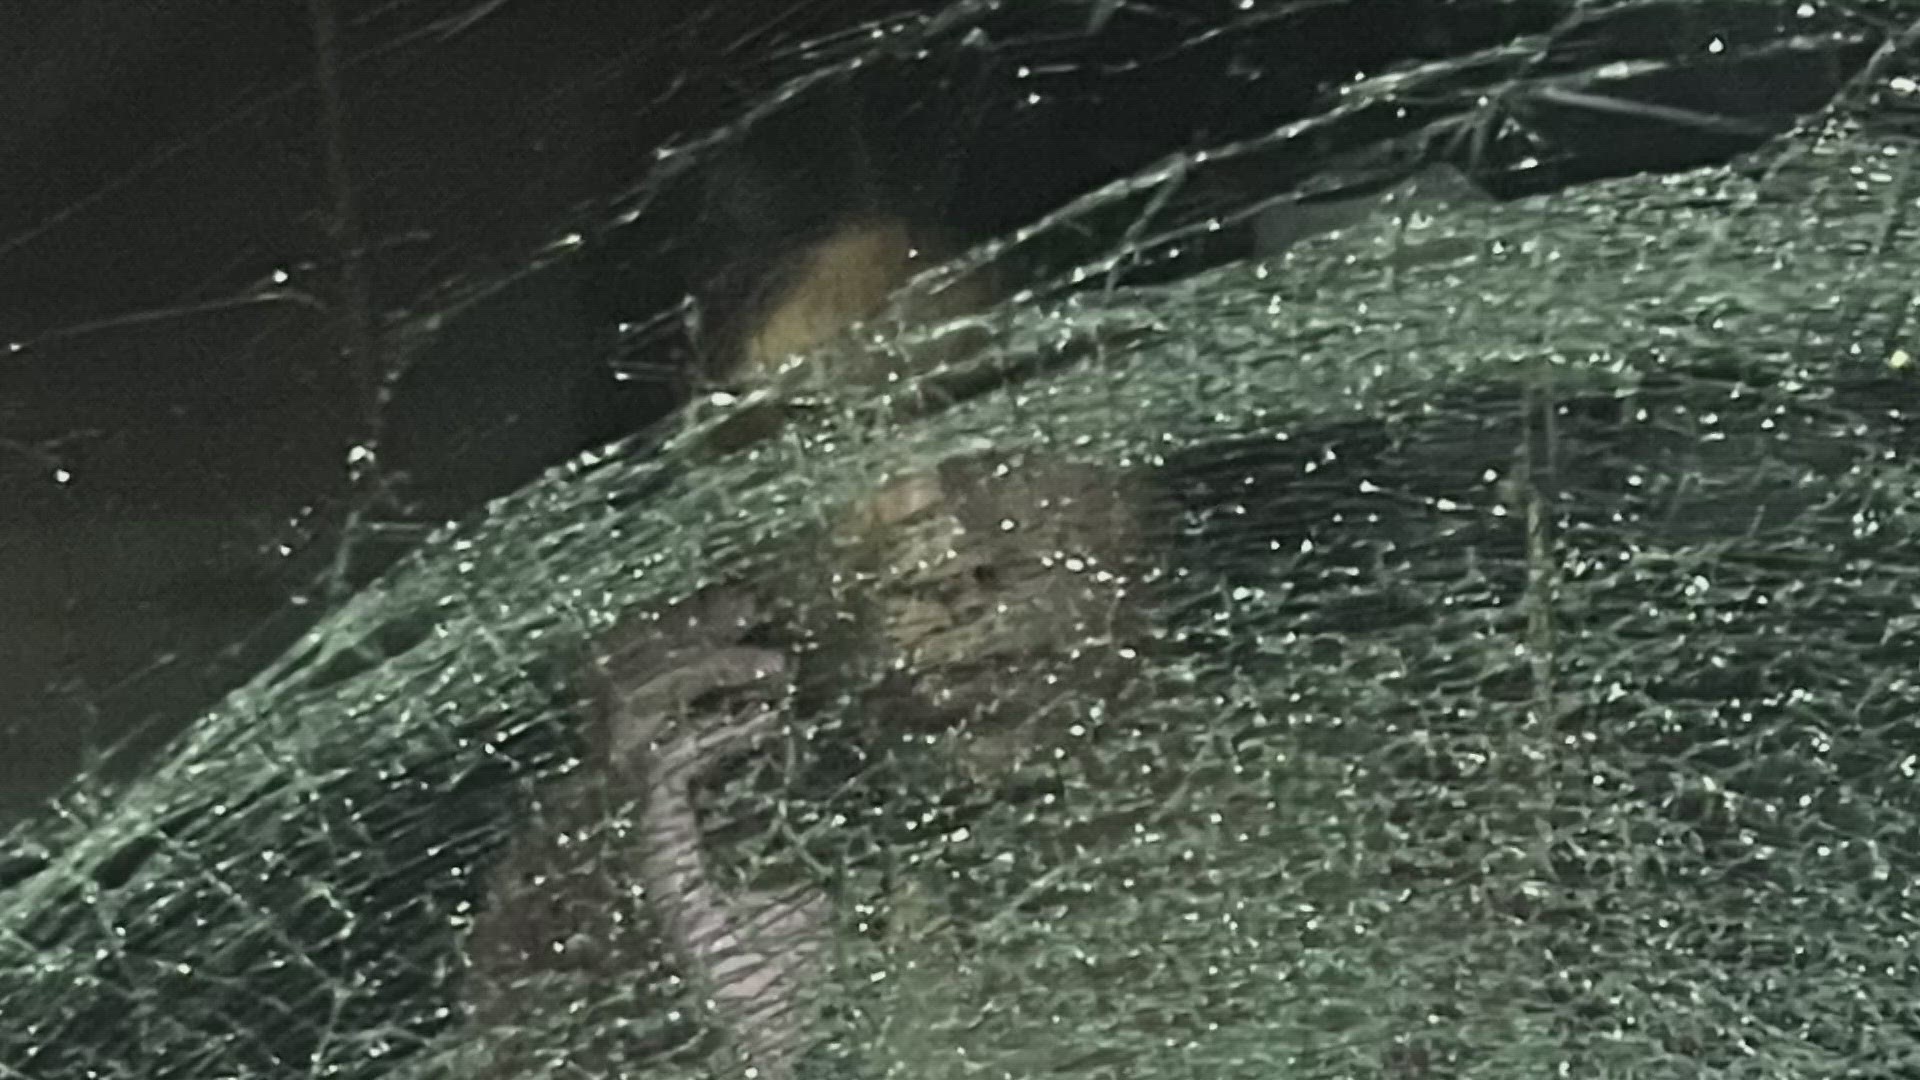 Itzel Gierach and her husband said Thursday night, they were driving along Highway 60 near Johnstown when something hit and smashed their windshield.